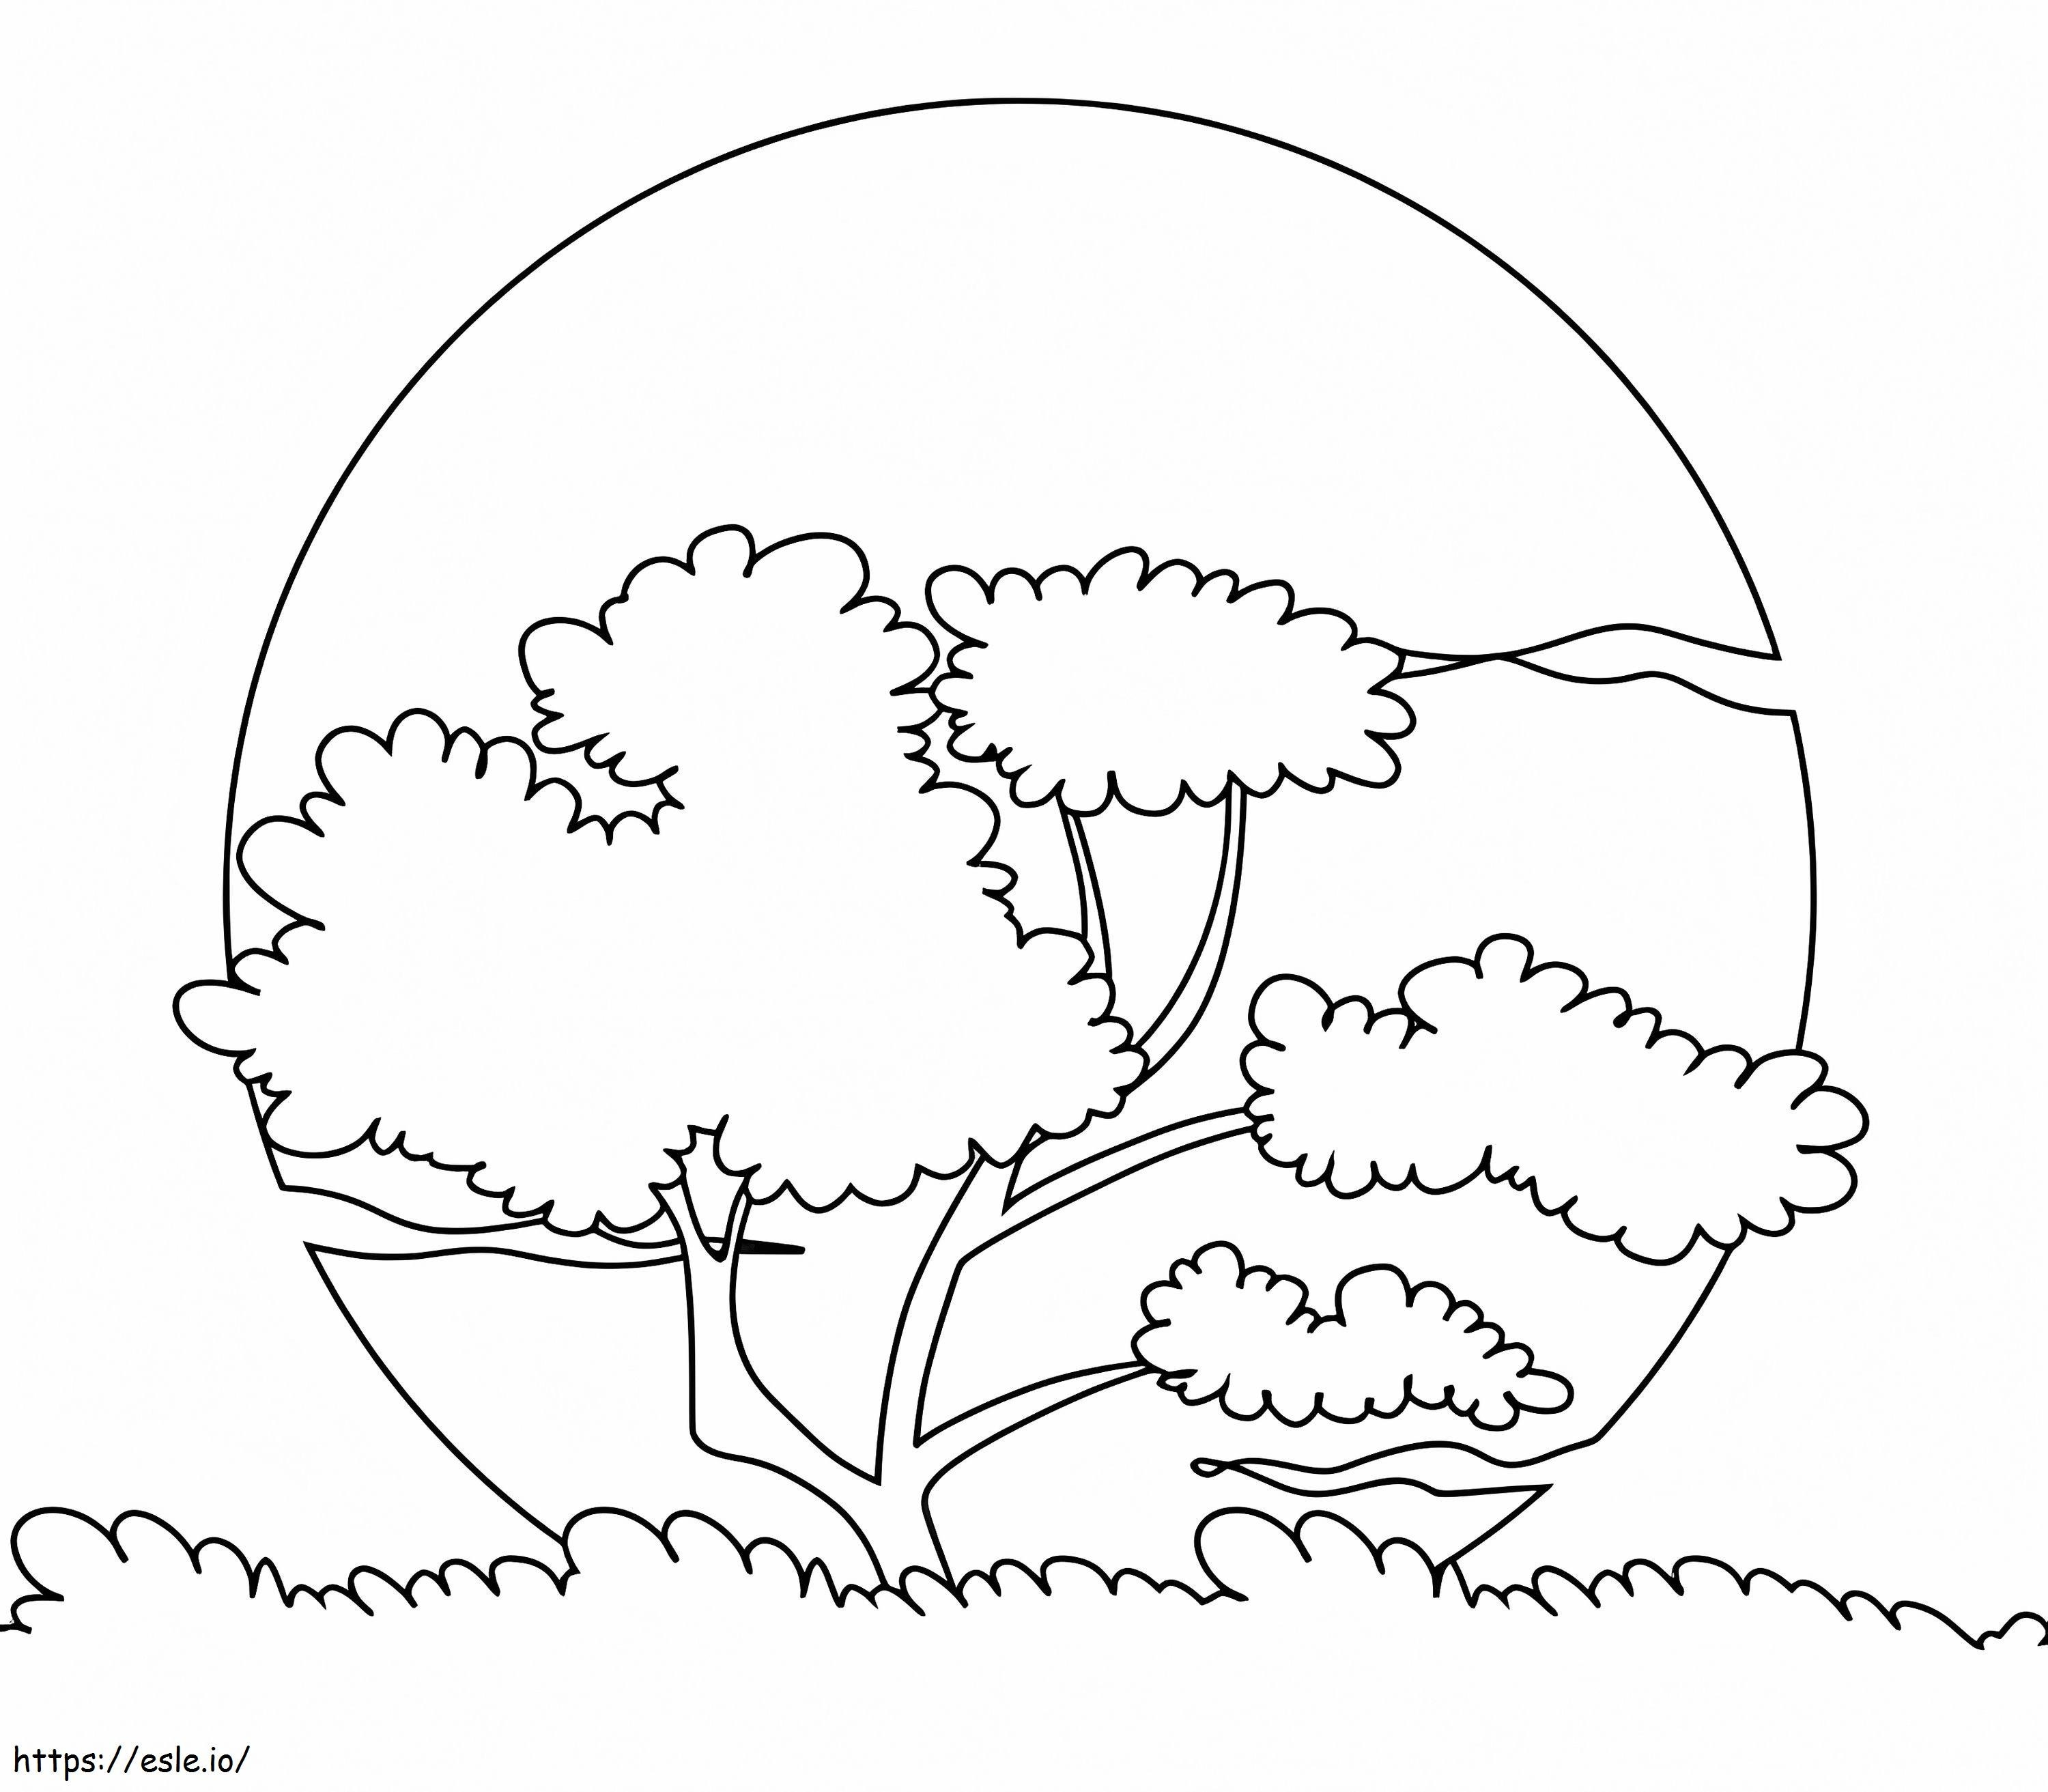 Awsome Sunset Picture coloring page